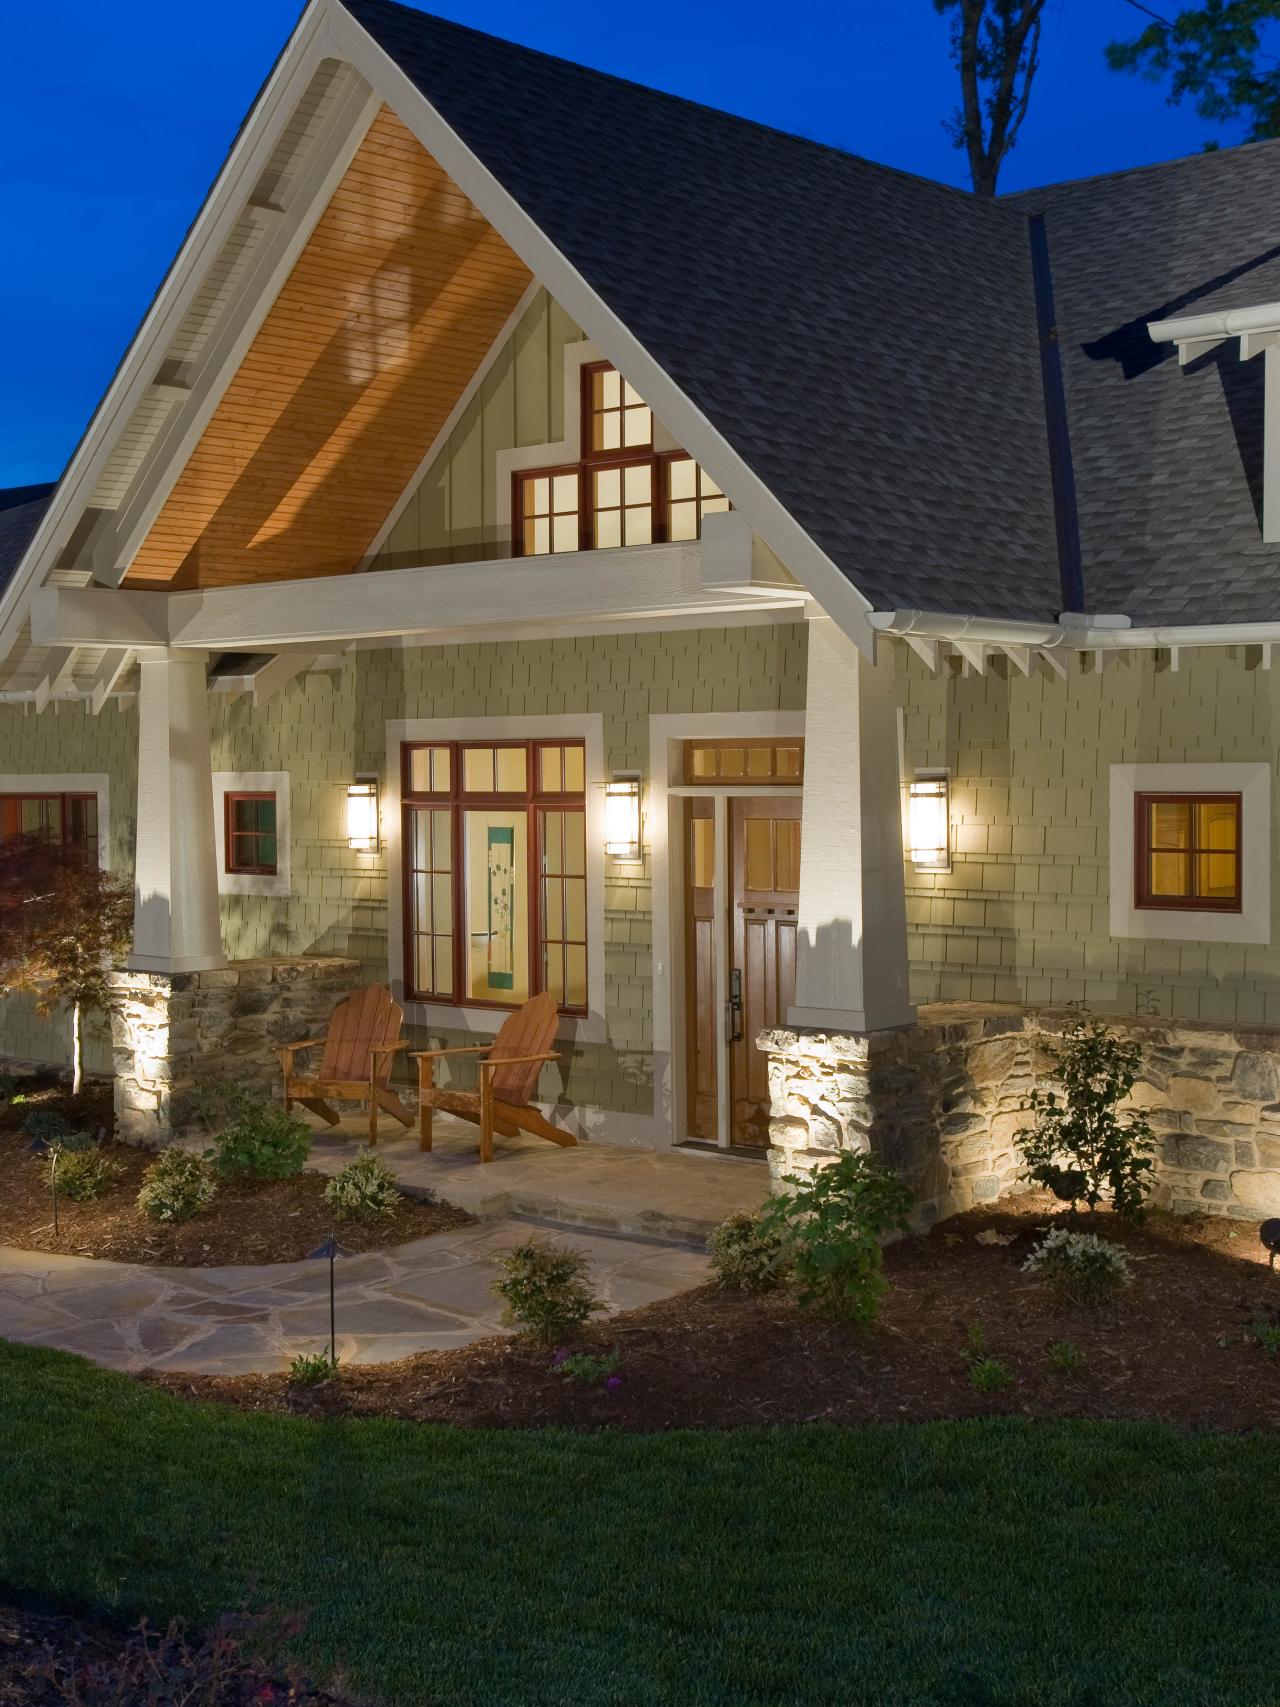 The Porch Appeal: Crafting Welcoming Exteriors For Cottage Homes